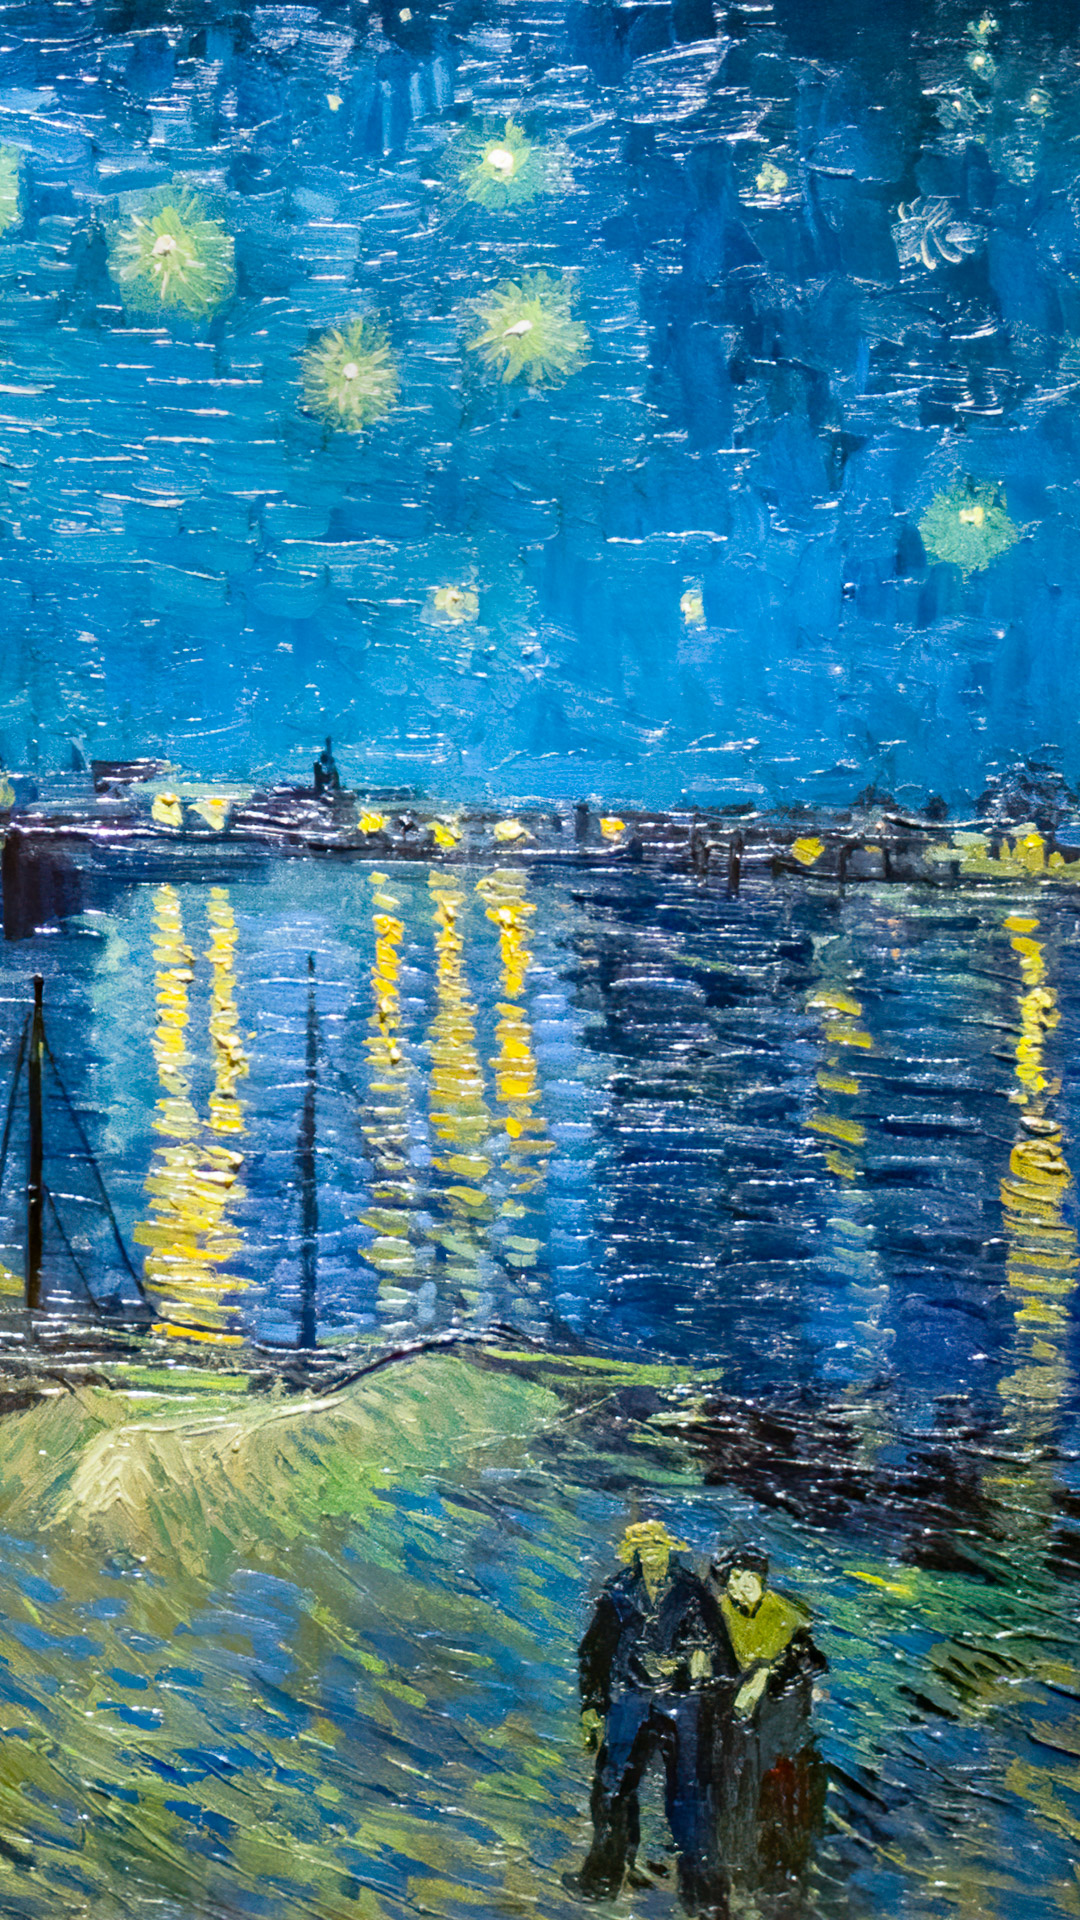 Immerse yourself in the world of art with our free phone wallpaper download, featuring van Gogh’s famous painting, “Starry Night”, a masterpiece of post-impressionism.